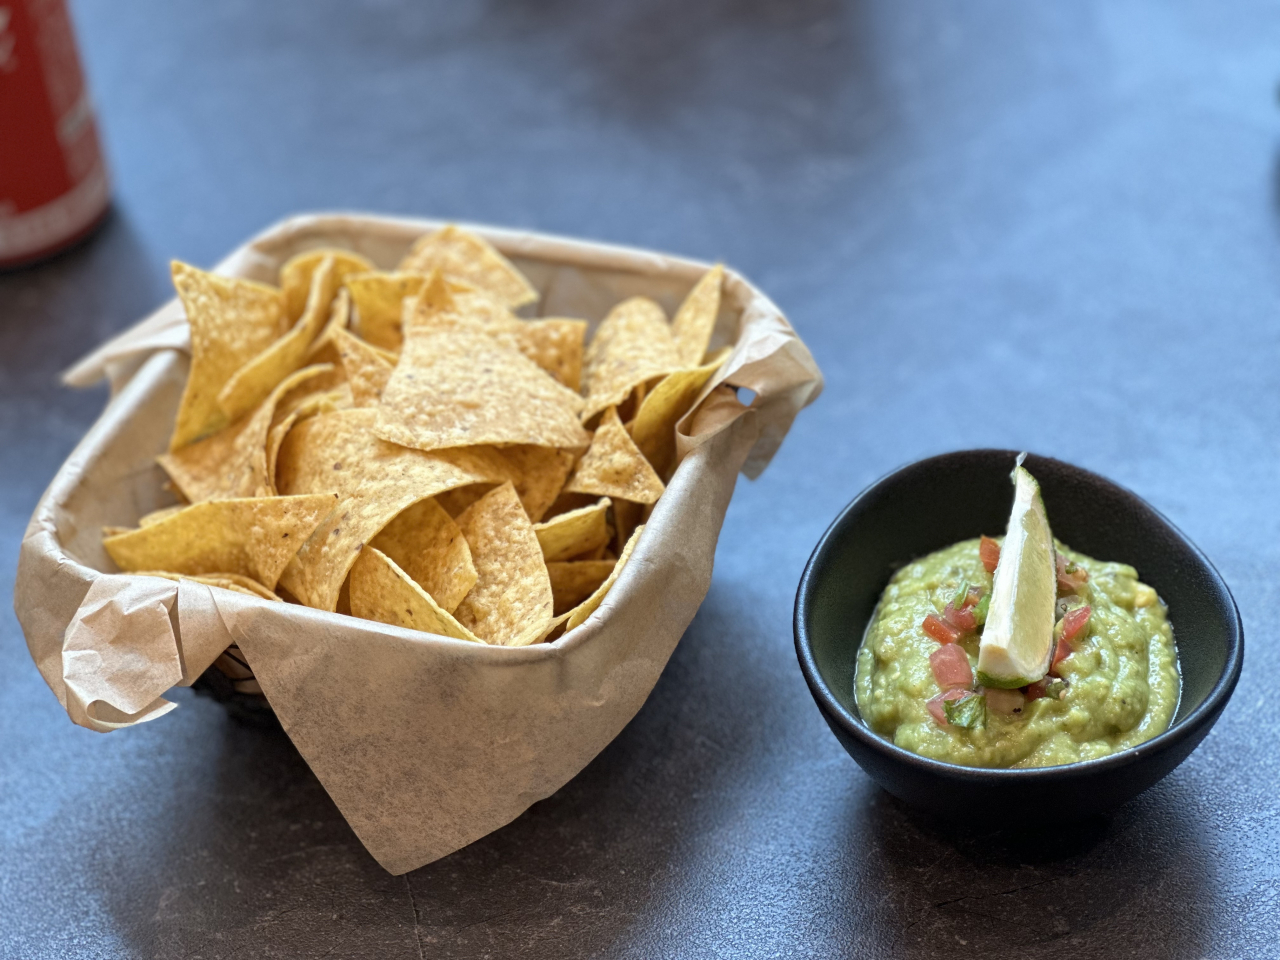 Chips and homemade guacamole served at El Pino 323 (Ali Abbot/The Korea Herald)